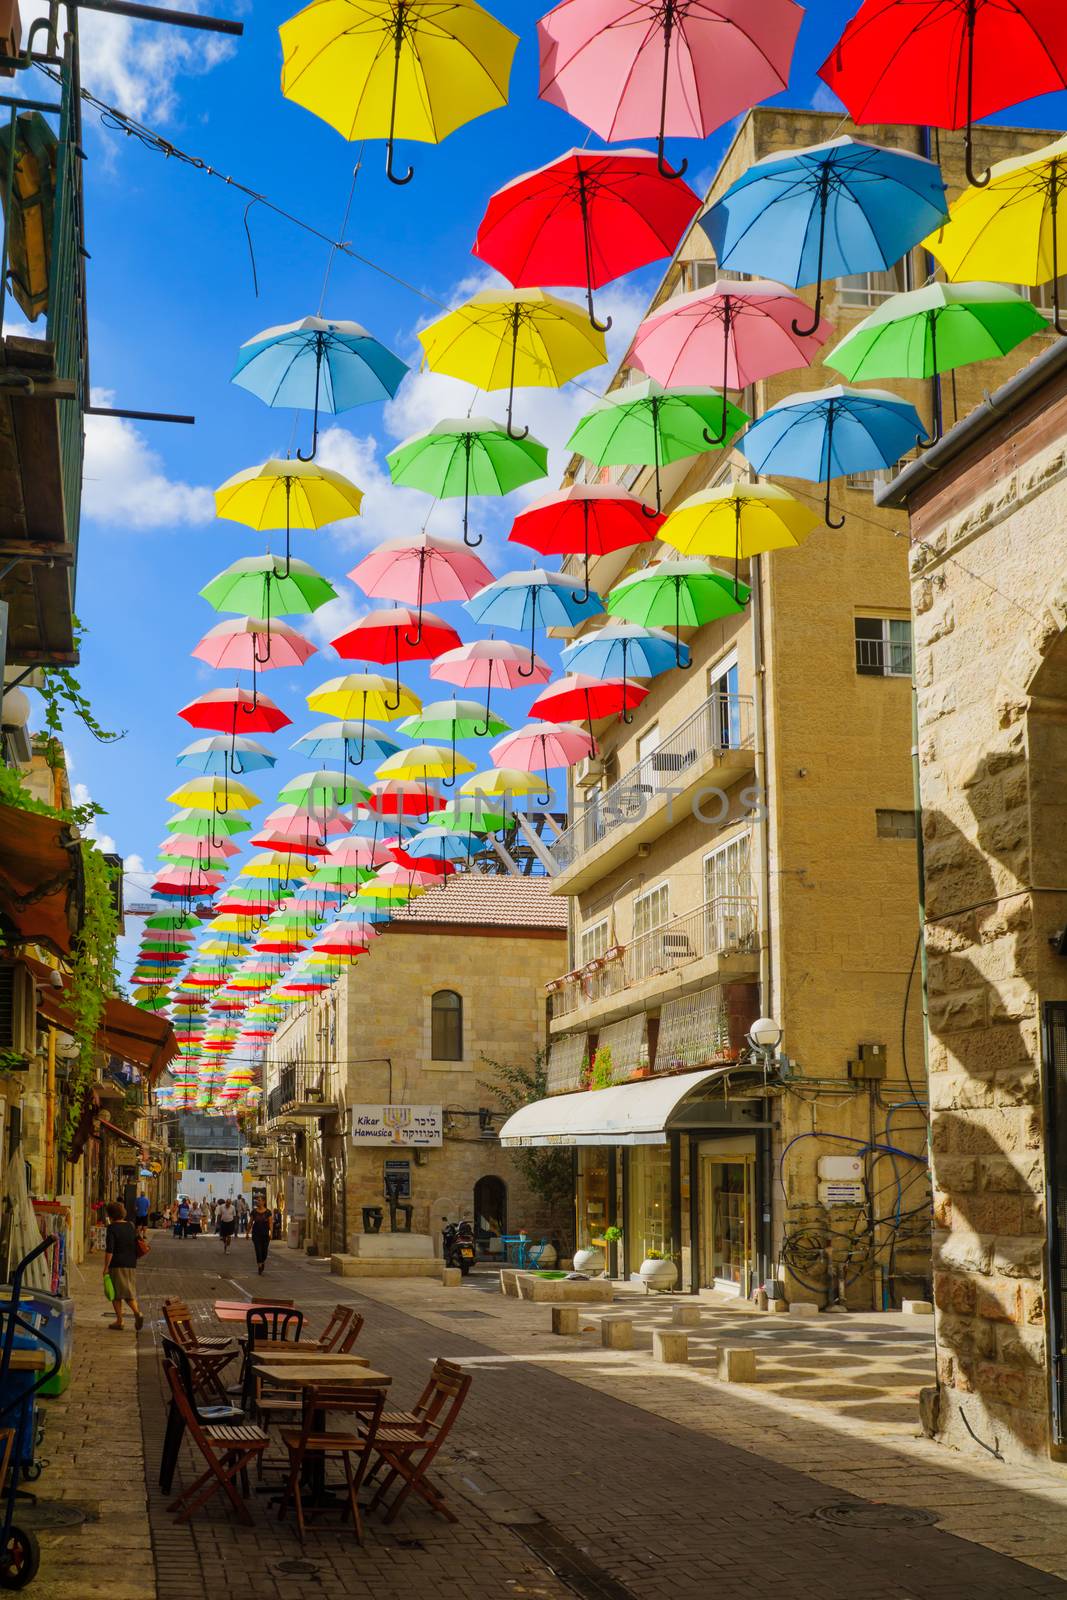 Street, decorated with colorful umbrellas, Jerusalem by RnDmS